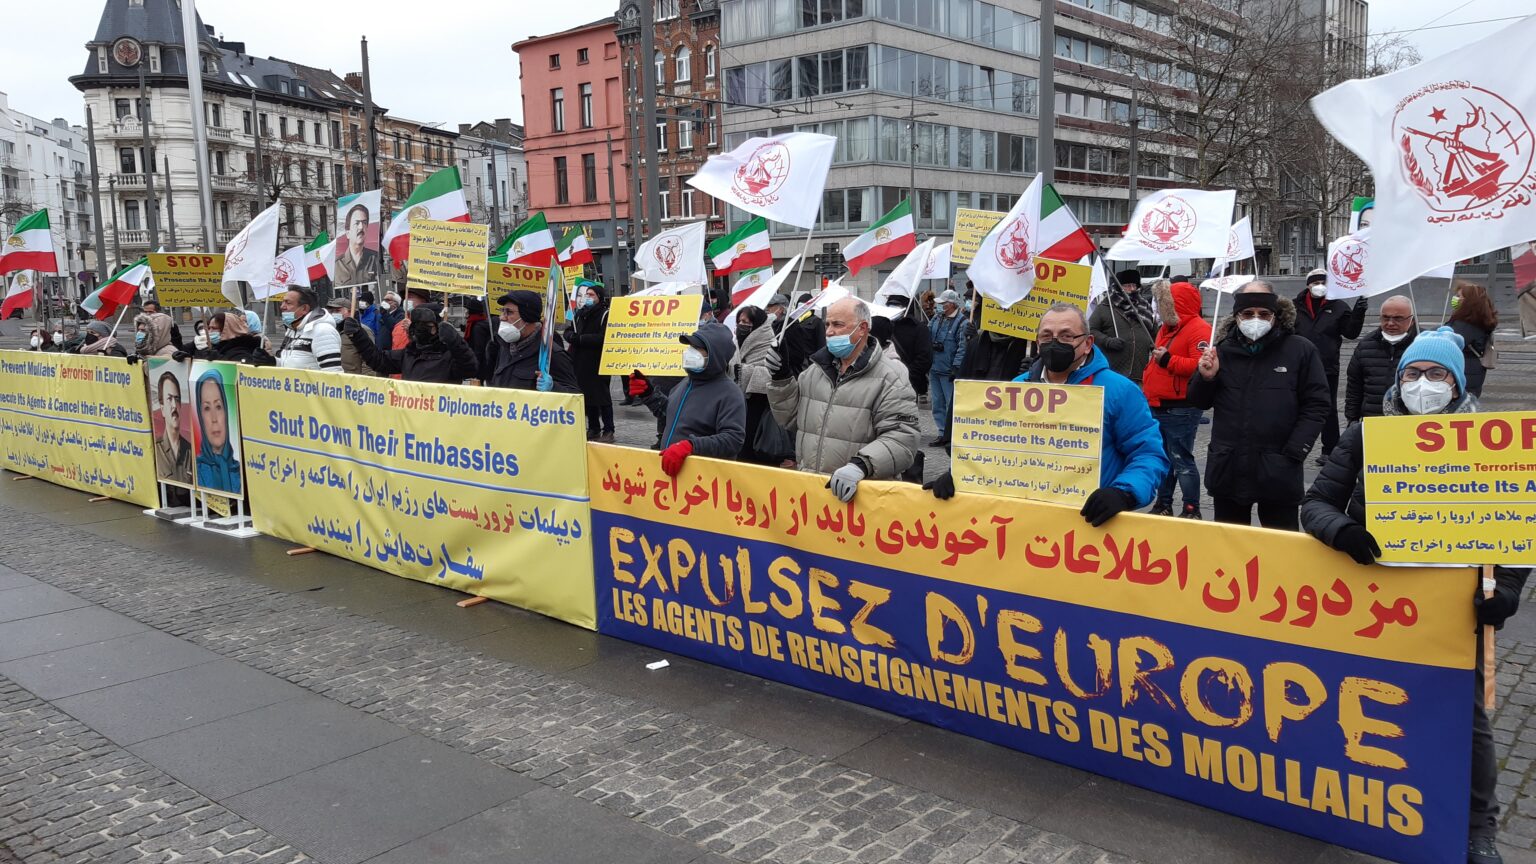 Antwerp Court of Appeal: Experts Opinion on 2018 Foiled Bombing of “Free Iran” Rally